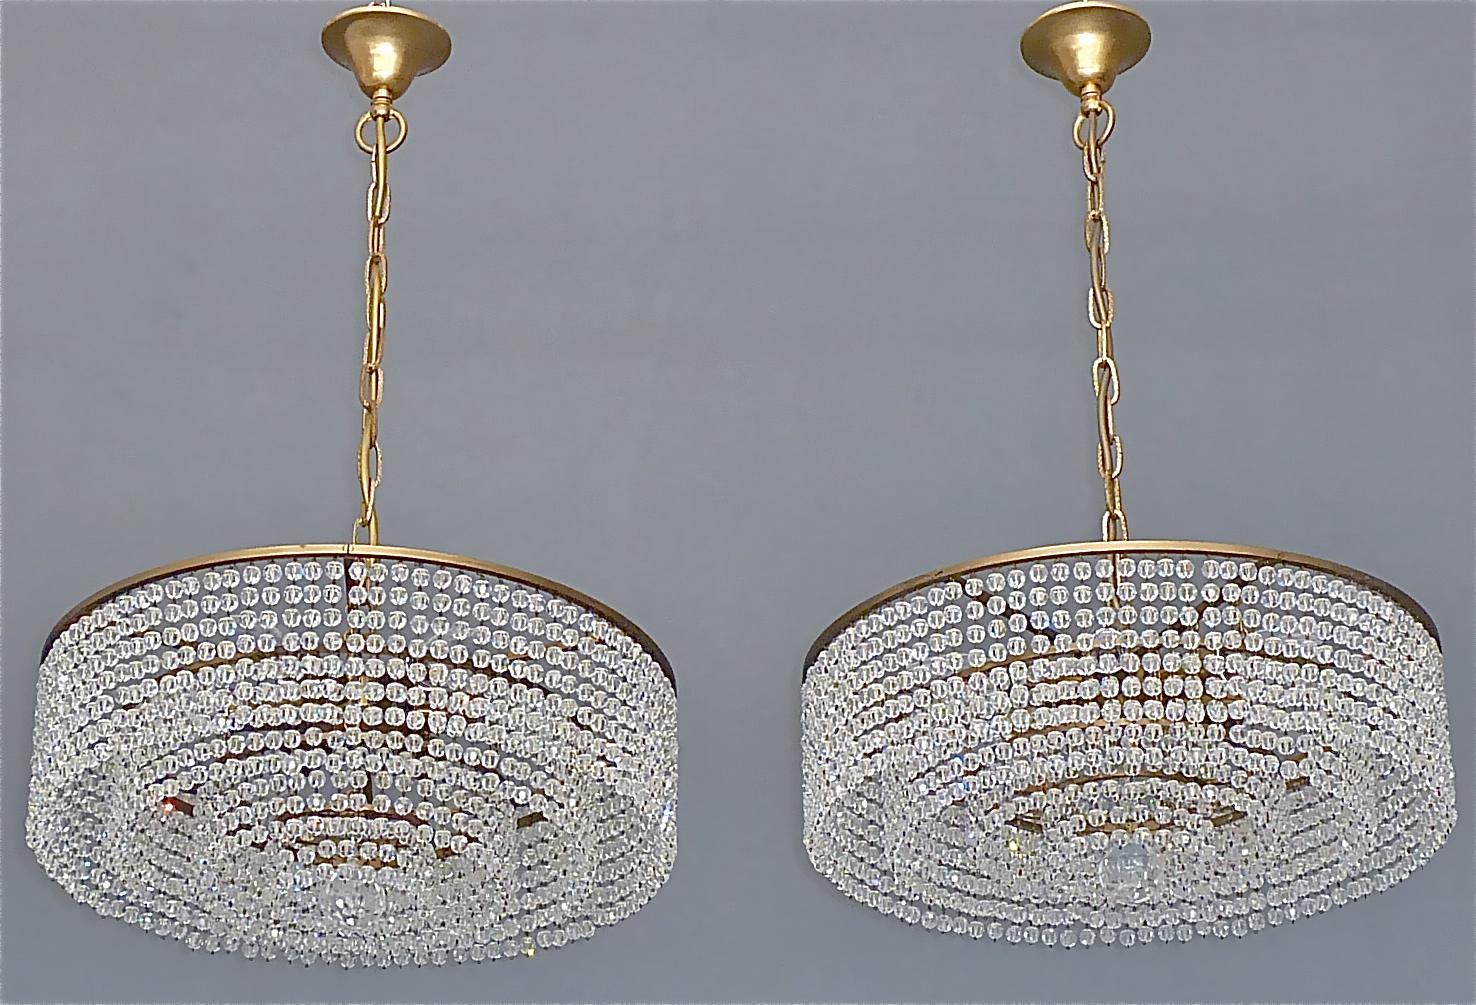 Beautiful Lobmeyr attribution patinated brass and crystal glass chandelier Austria, Vienna, circa 1950s. It has four rings and additional a center crystal with high lead and hand-cut faceted crystal pearl strings which sparkle like diamonds. This